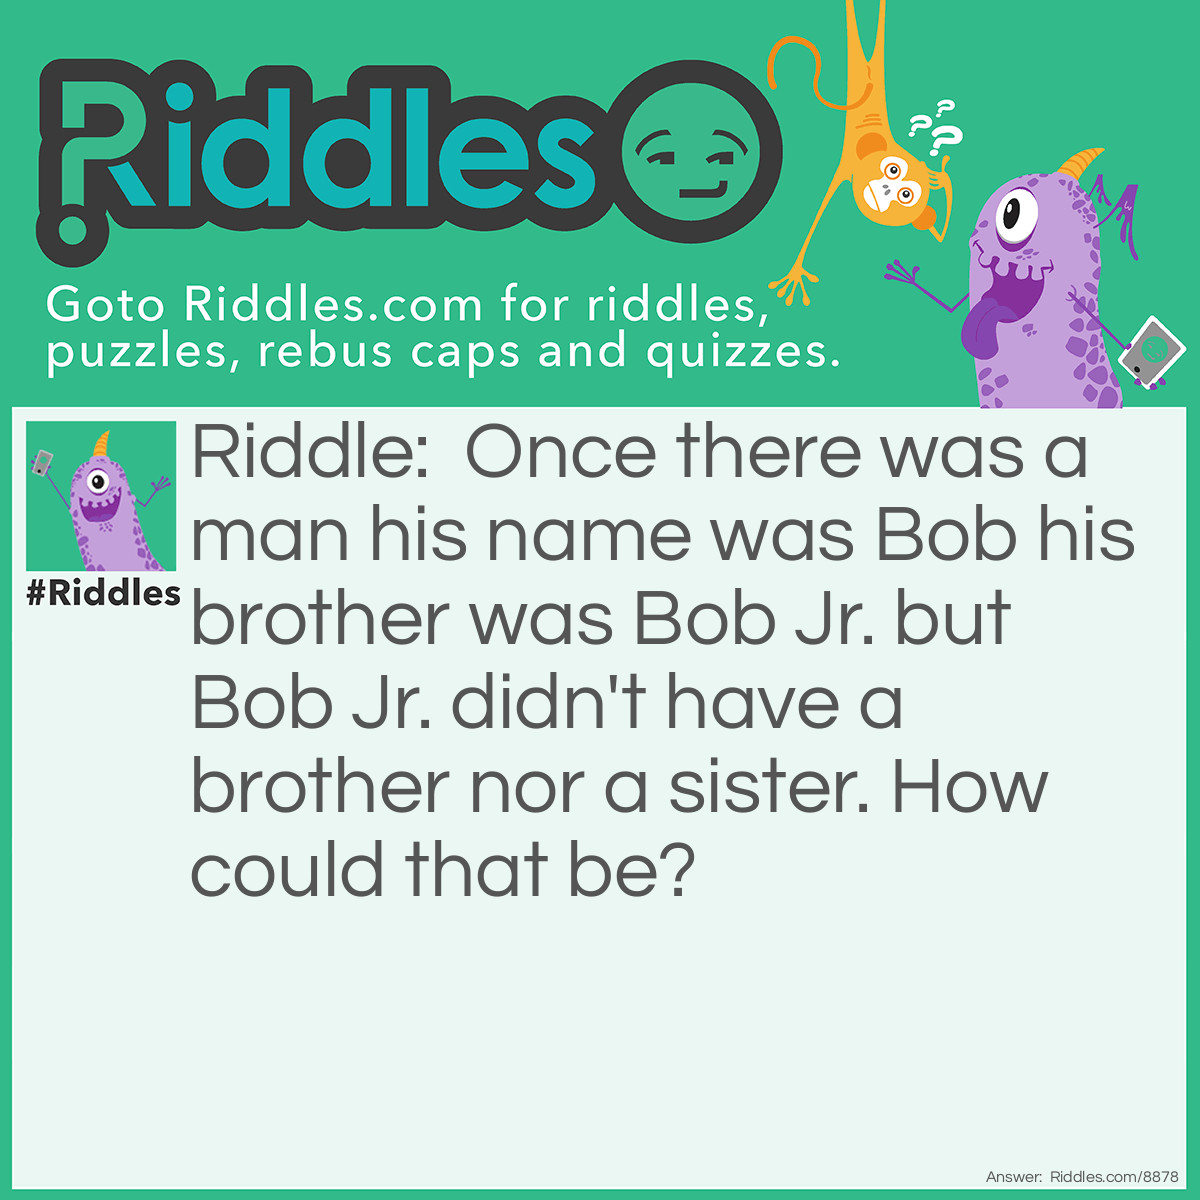 Riddle: Once there was a man his name was Bob his brother was Bob Jr. but Bob Jr. didn't have a brother nor a sister. How could that be? Answer: Because Bob is a stuffed human and Bob Jr. didn't have a brother so he pretended to have a brother.